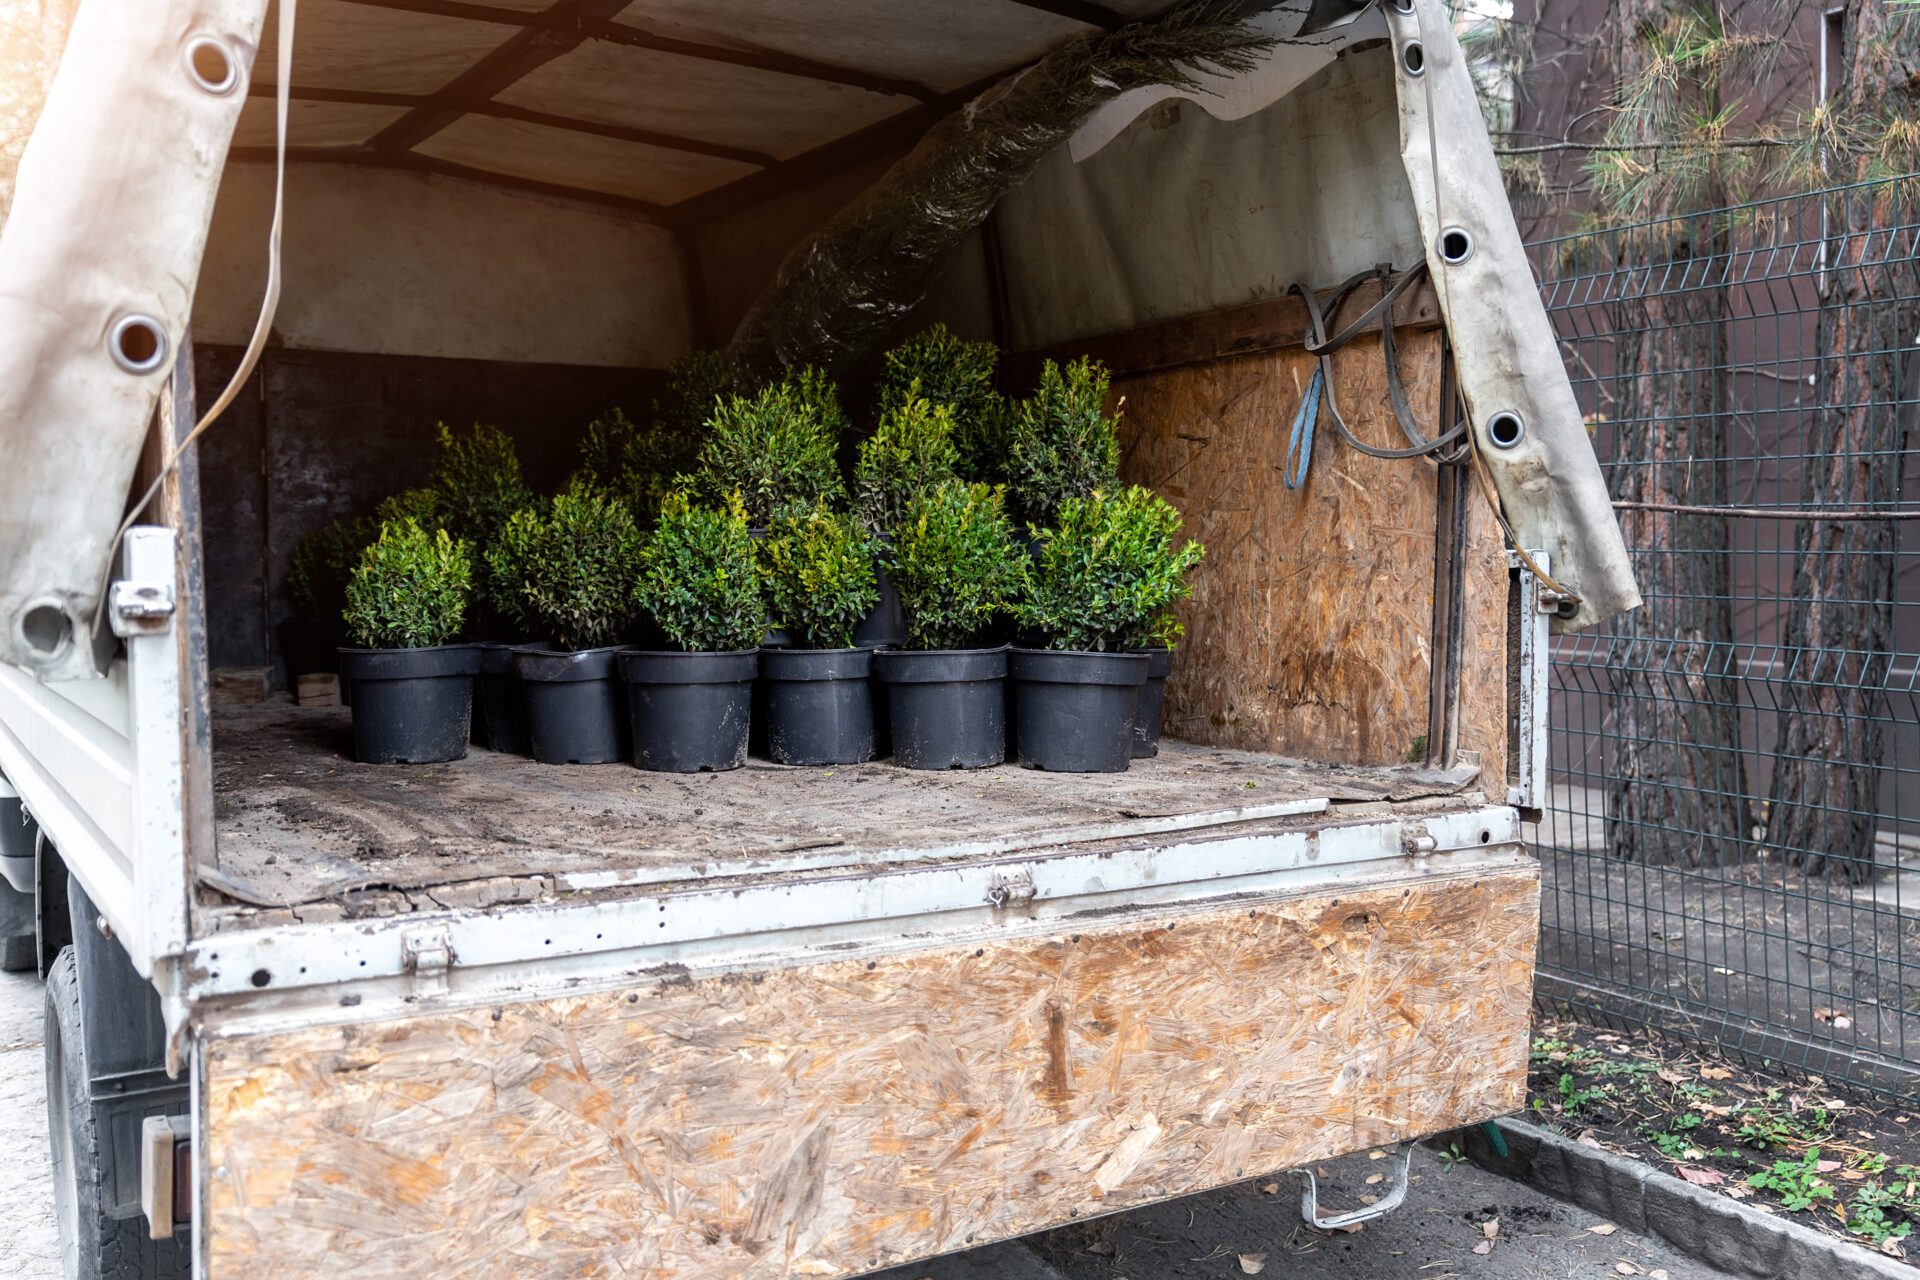 Landscaping Hauling, including shrubs and trees, gravel, or dirt.